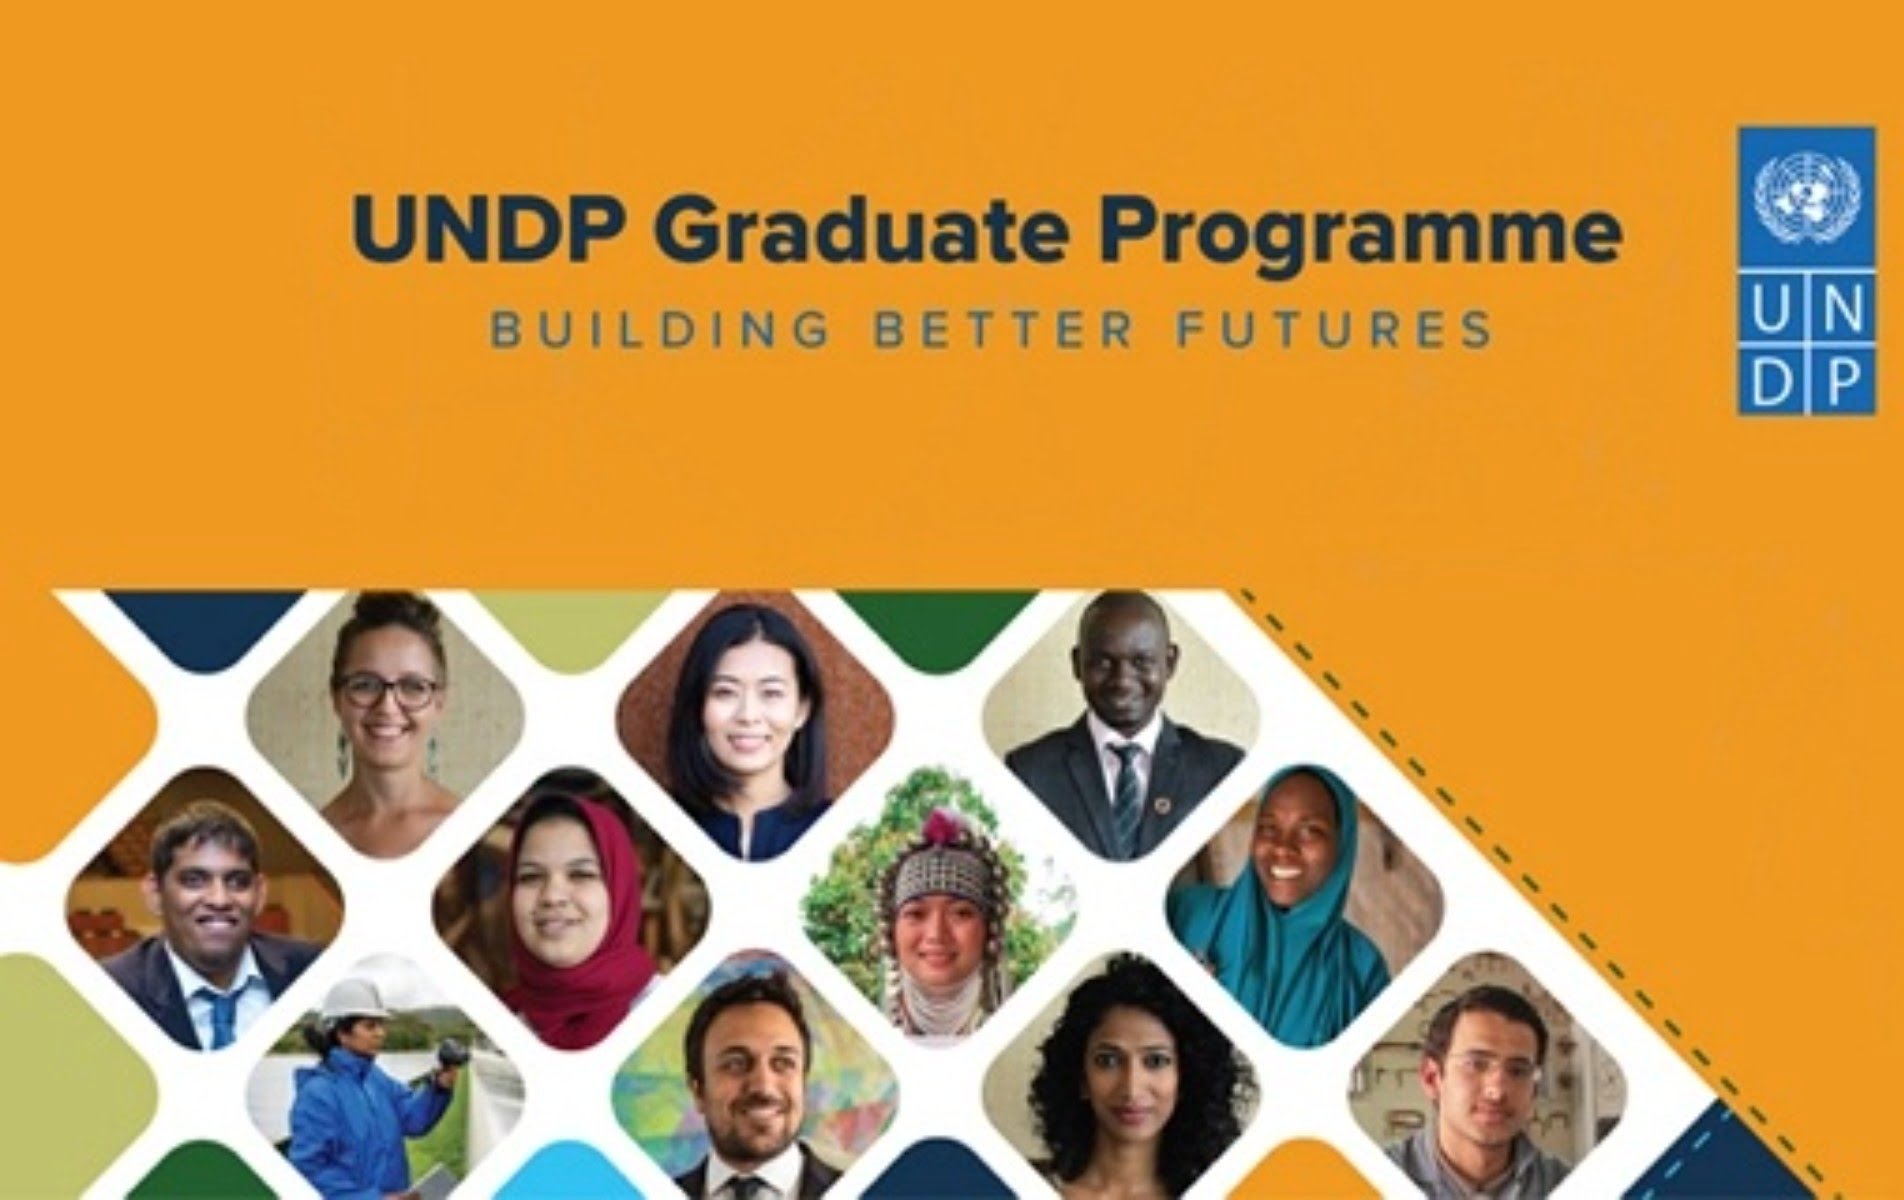 Fully-Funded UNDP Graduate Programme Pool 2023 for Recent Graduates